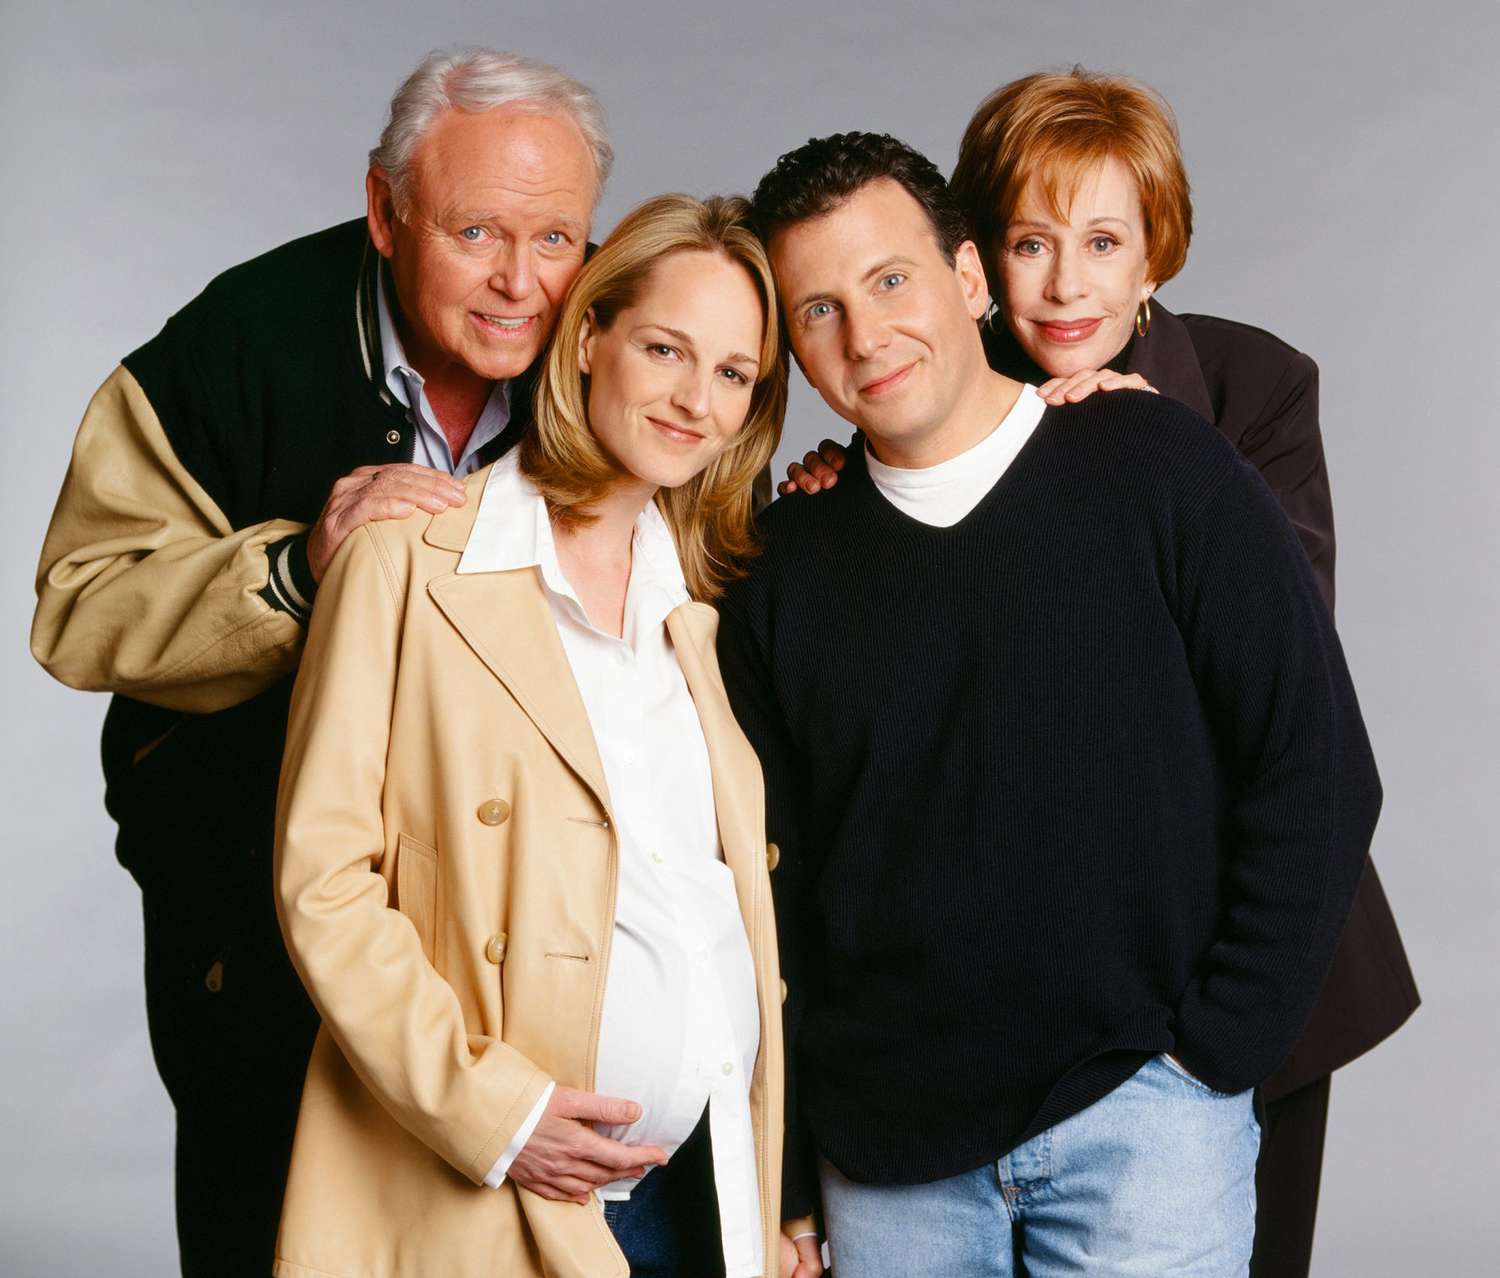 Carol Burnett, Carroll O'Connor, Helen Hunt, and Paul Reiser on&nbsp;Mad About You on May 20, 1997